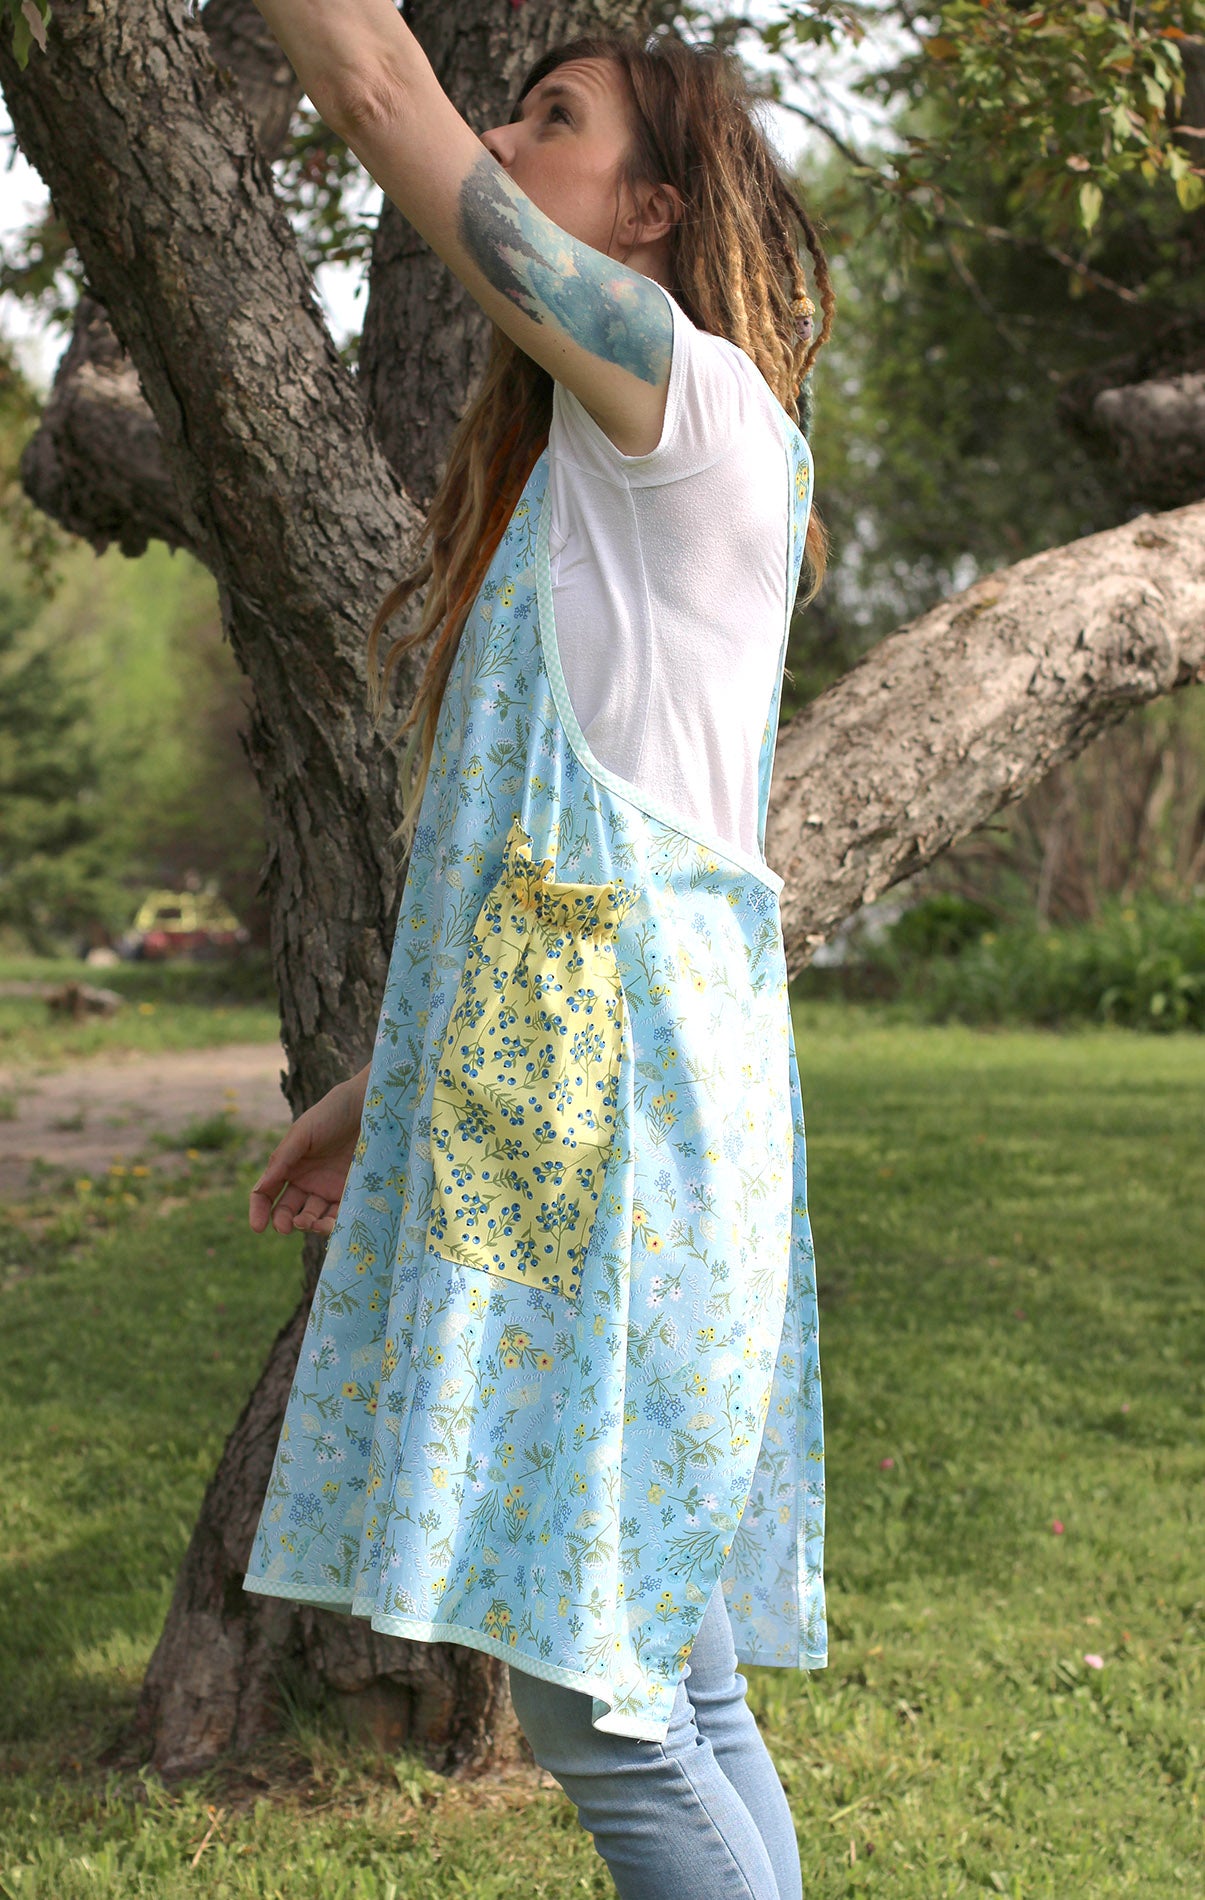 No Tie Apron in Blue Floral with Yellow Pockets - Side view with model reaching up into a tree.